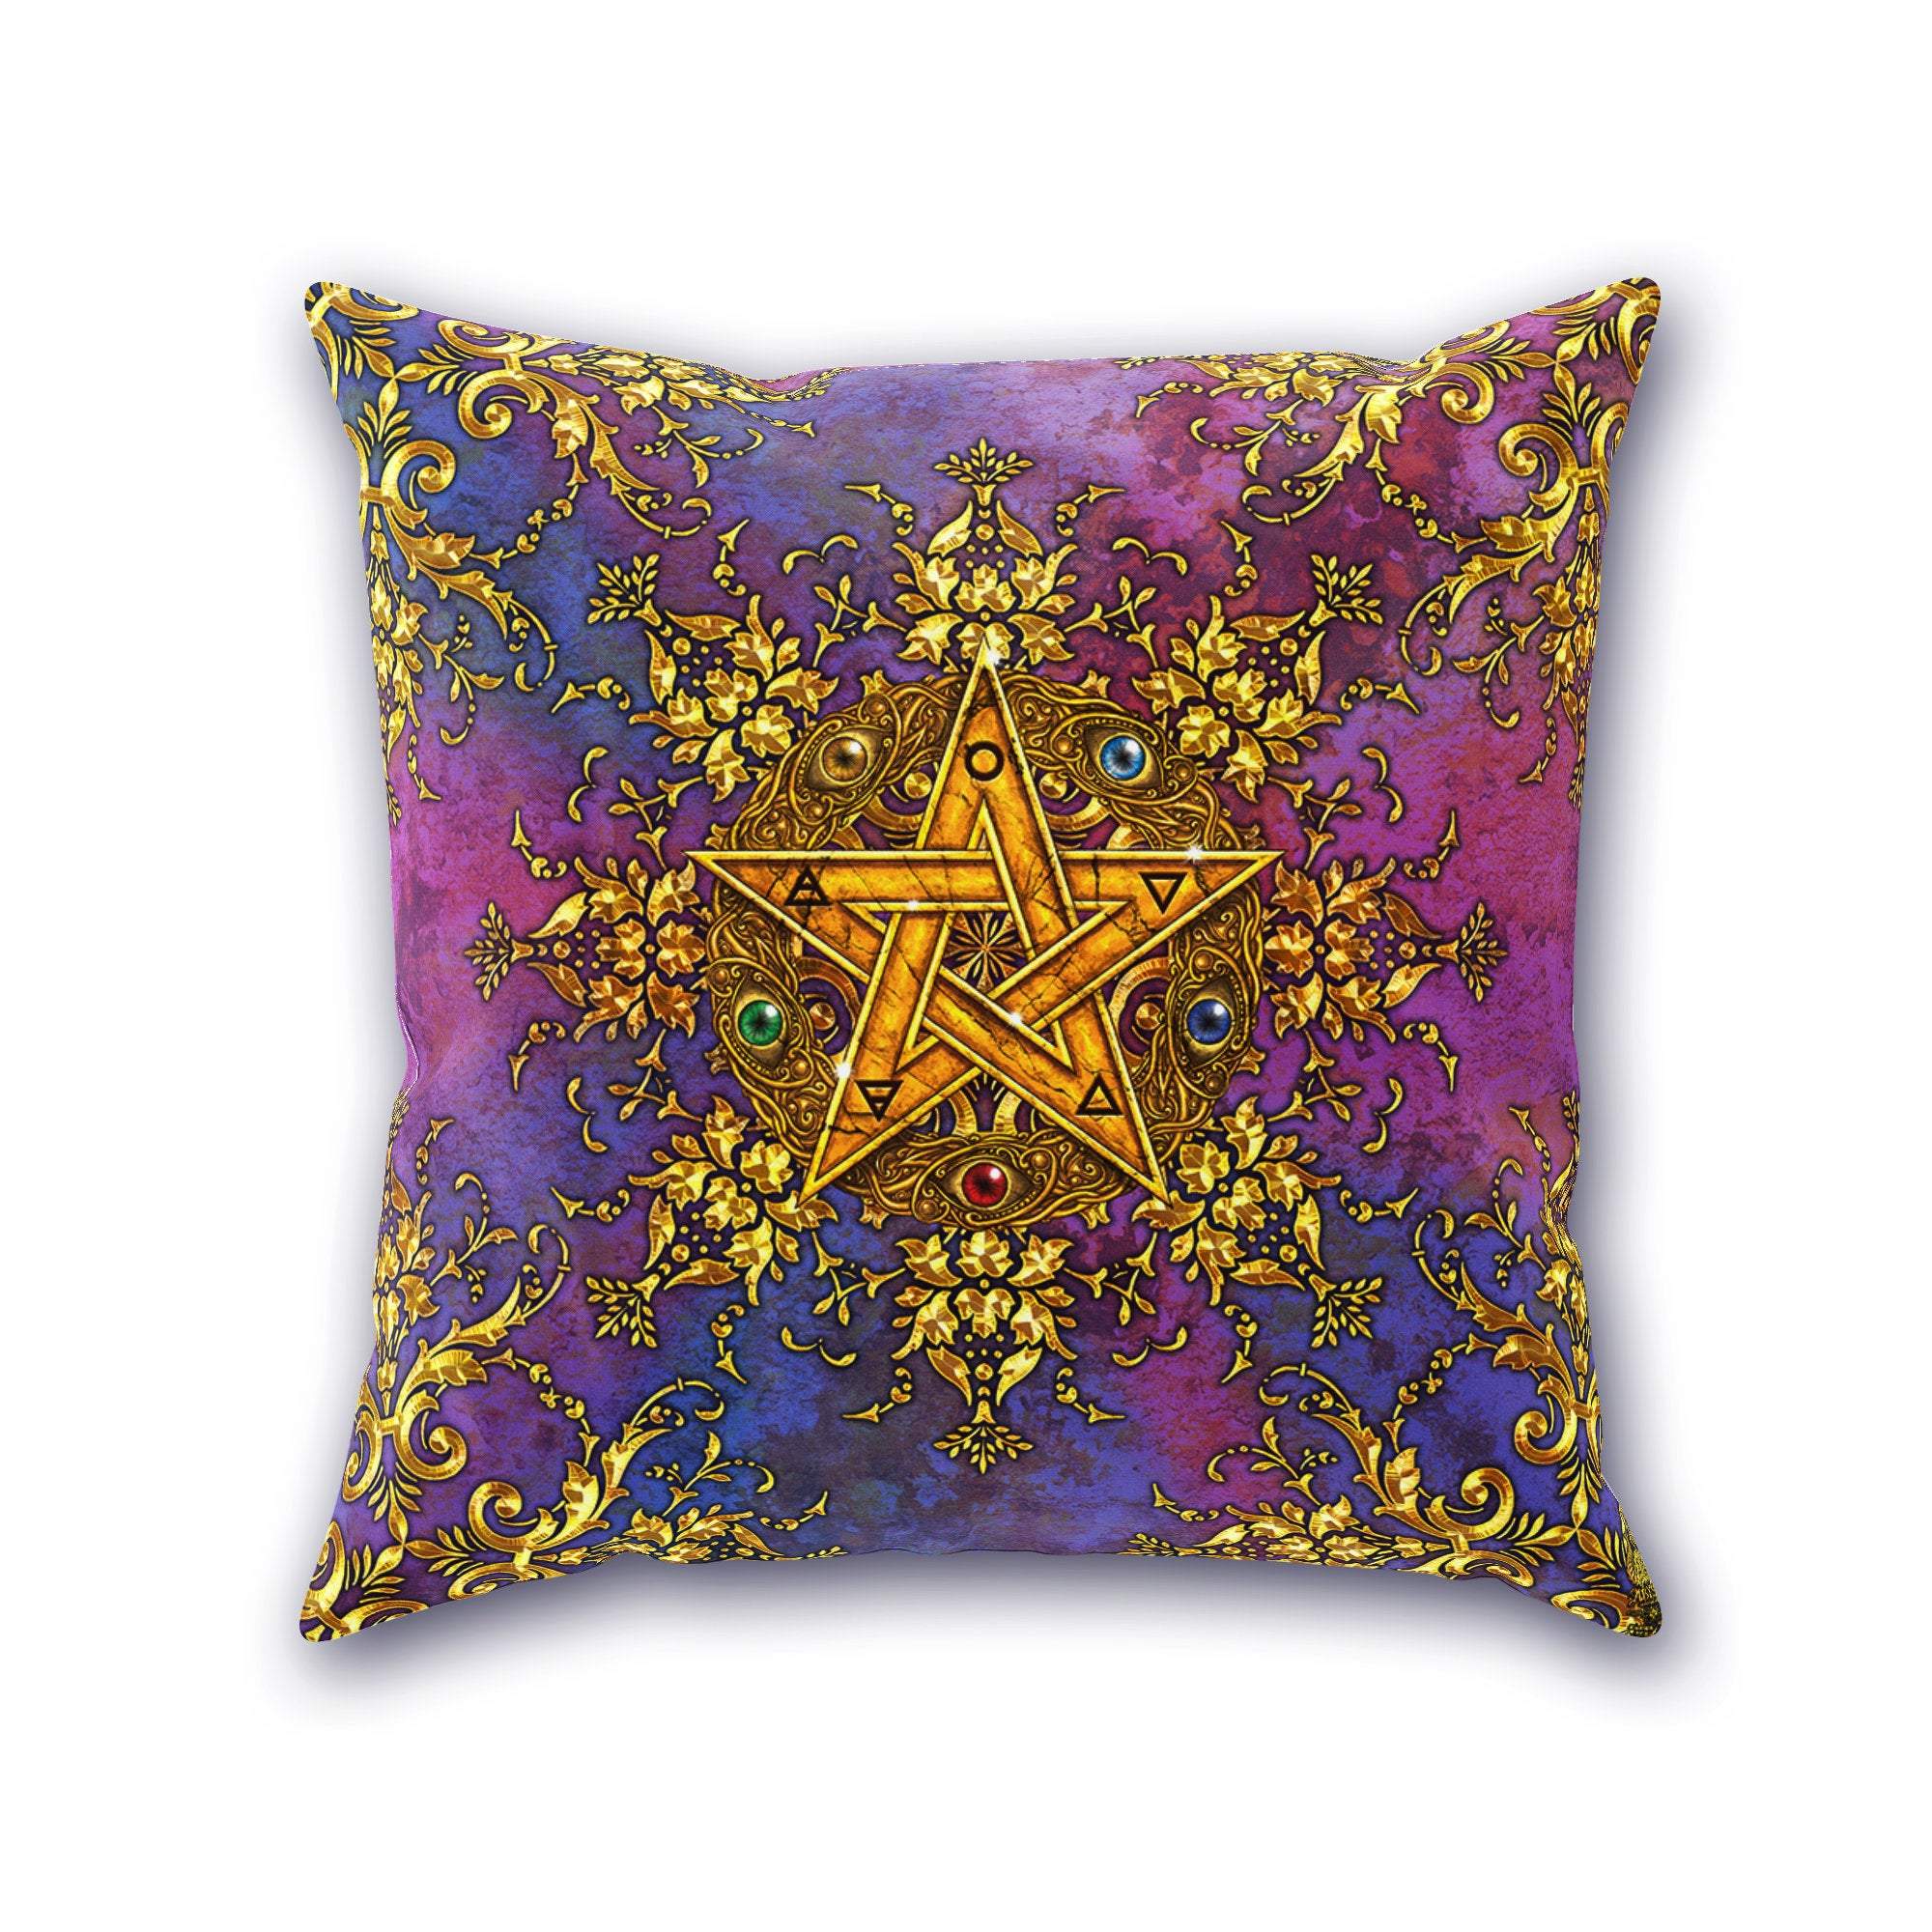 Witch Throw Pillow, Decorative Accent Cushion, Pentacle, Wiccan Home Decor, Pagan Art, Funky and Eclectic - Gold - Abysm Internal